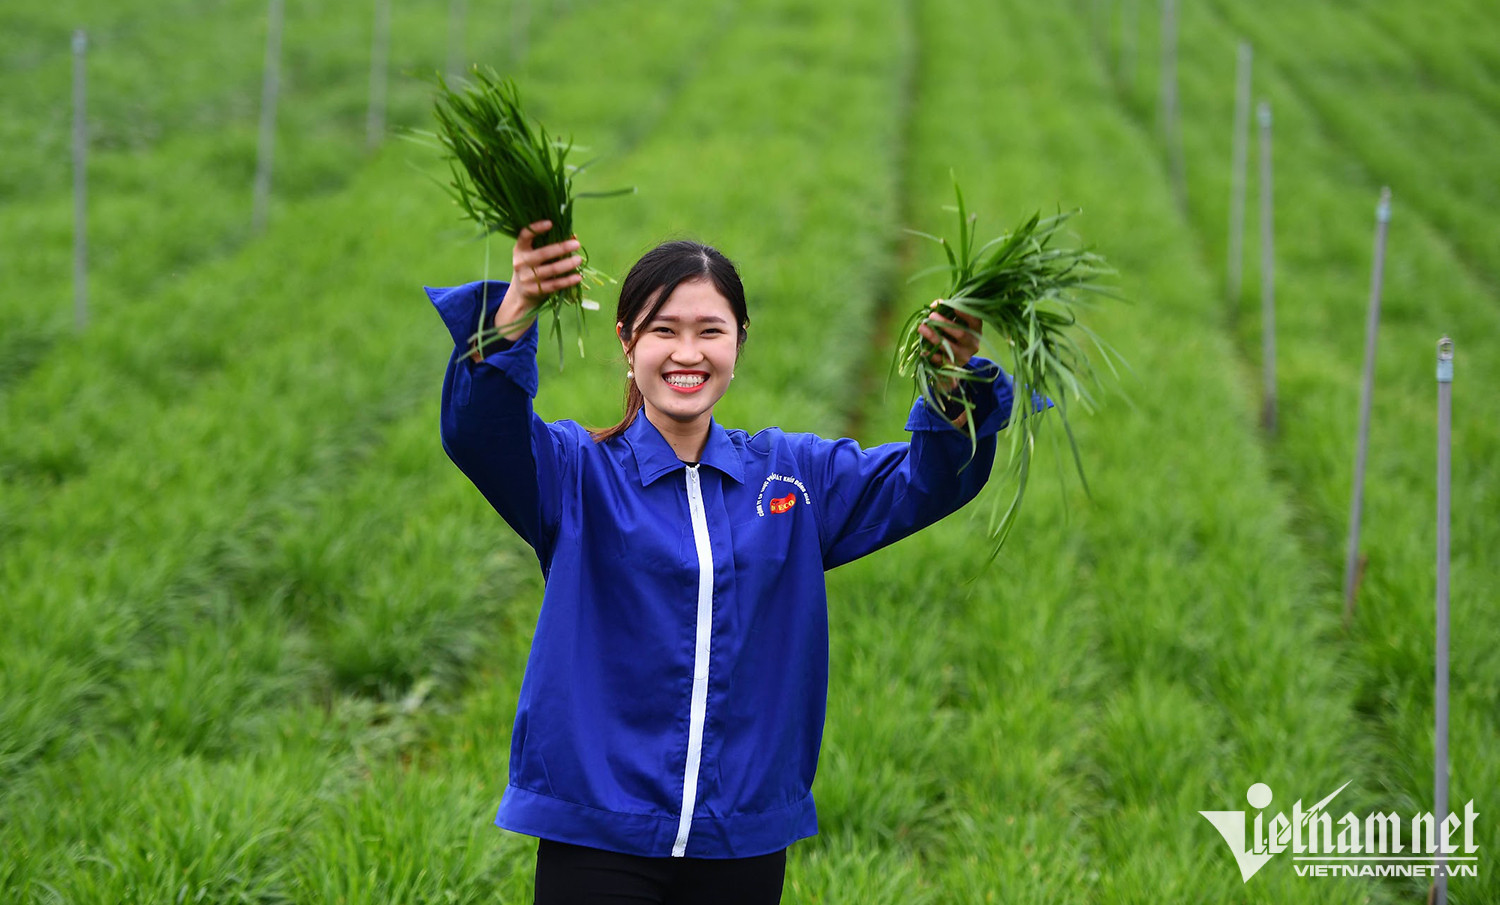 VN farmers to build brand value through improved cooperation